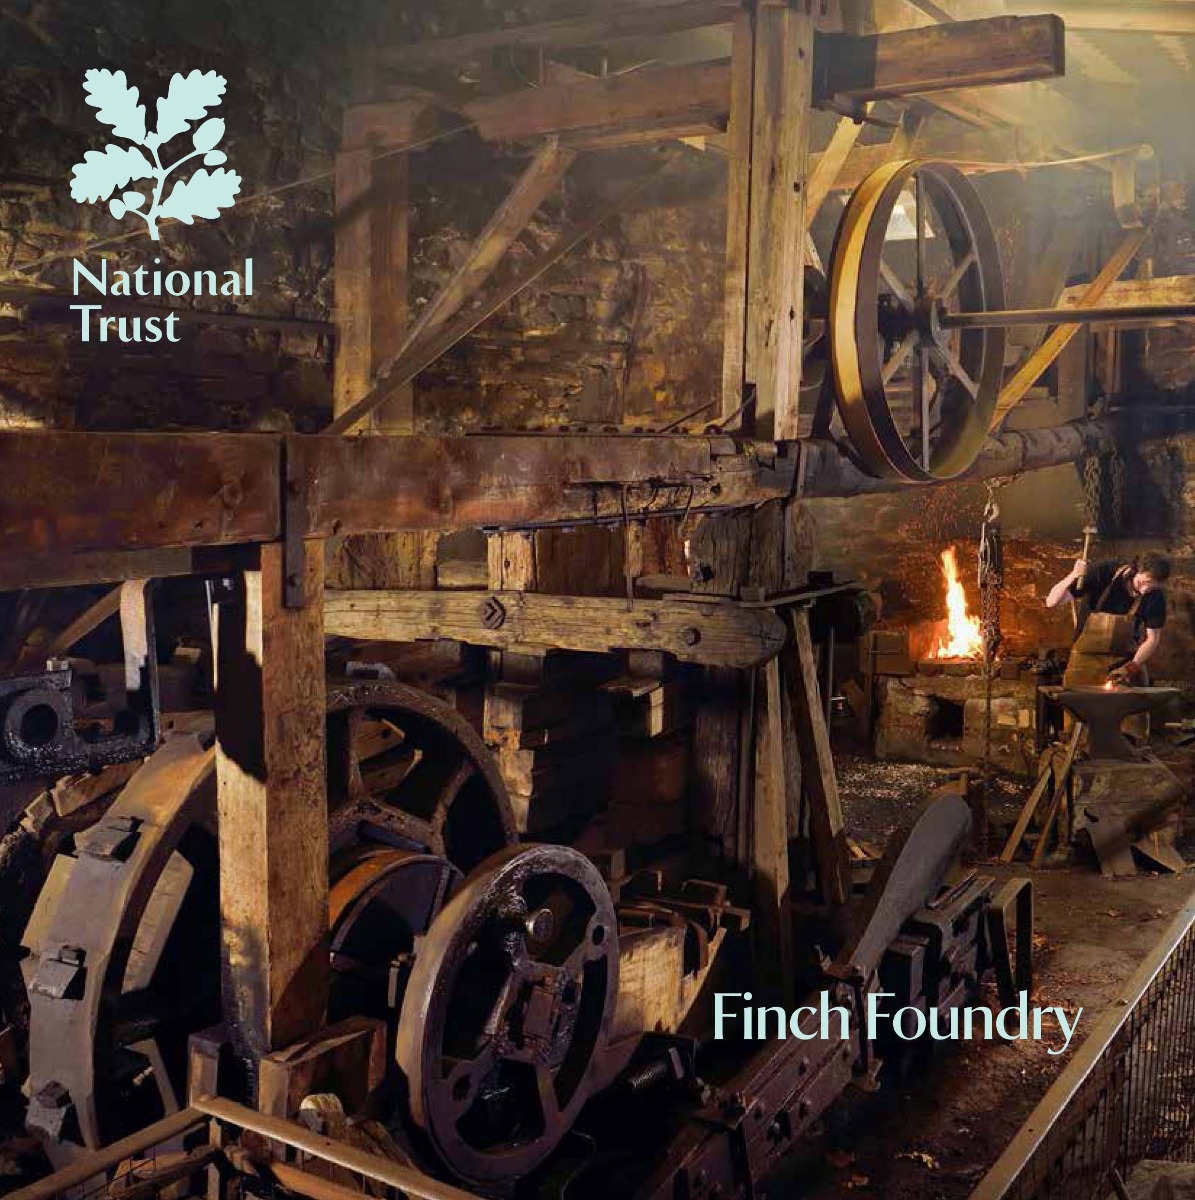 An image of National Trust Finch Foundry Guidebook